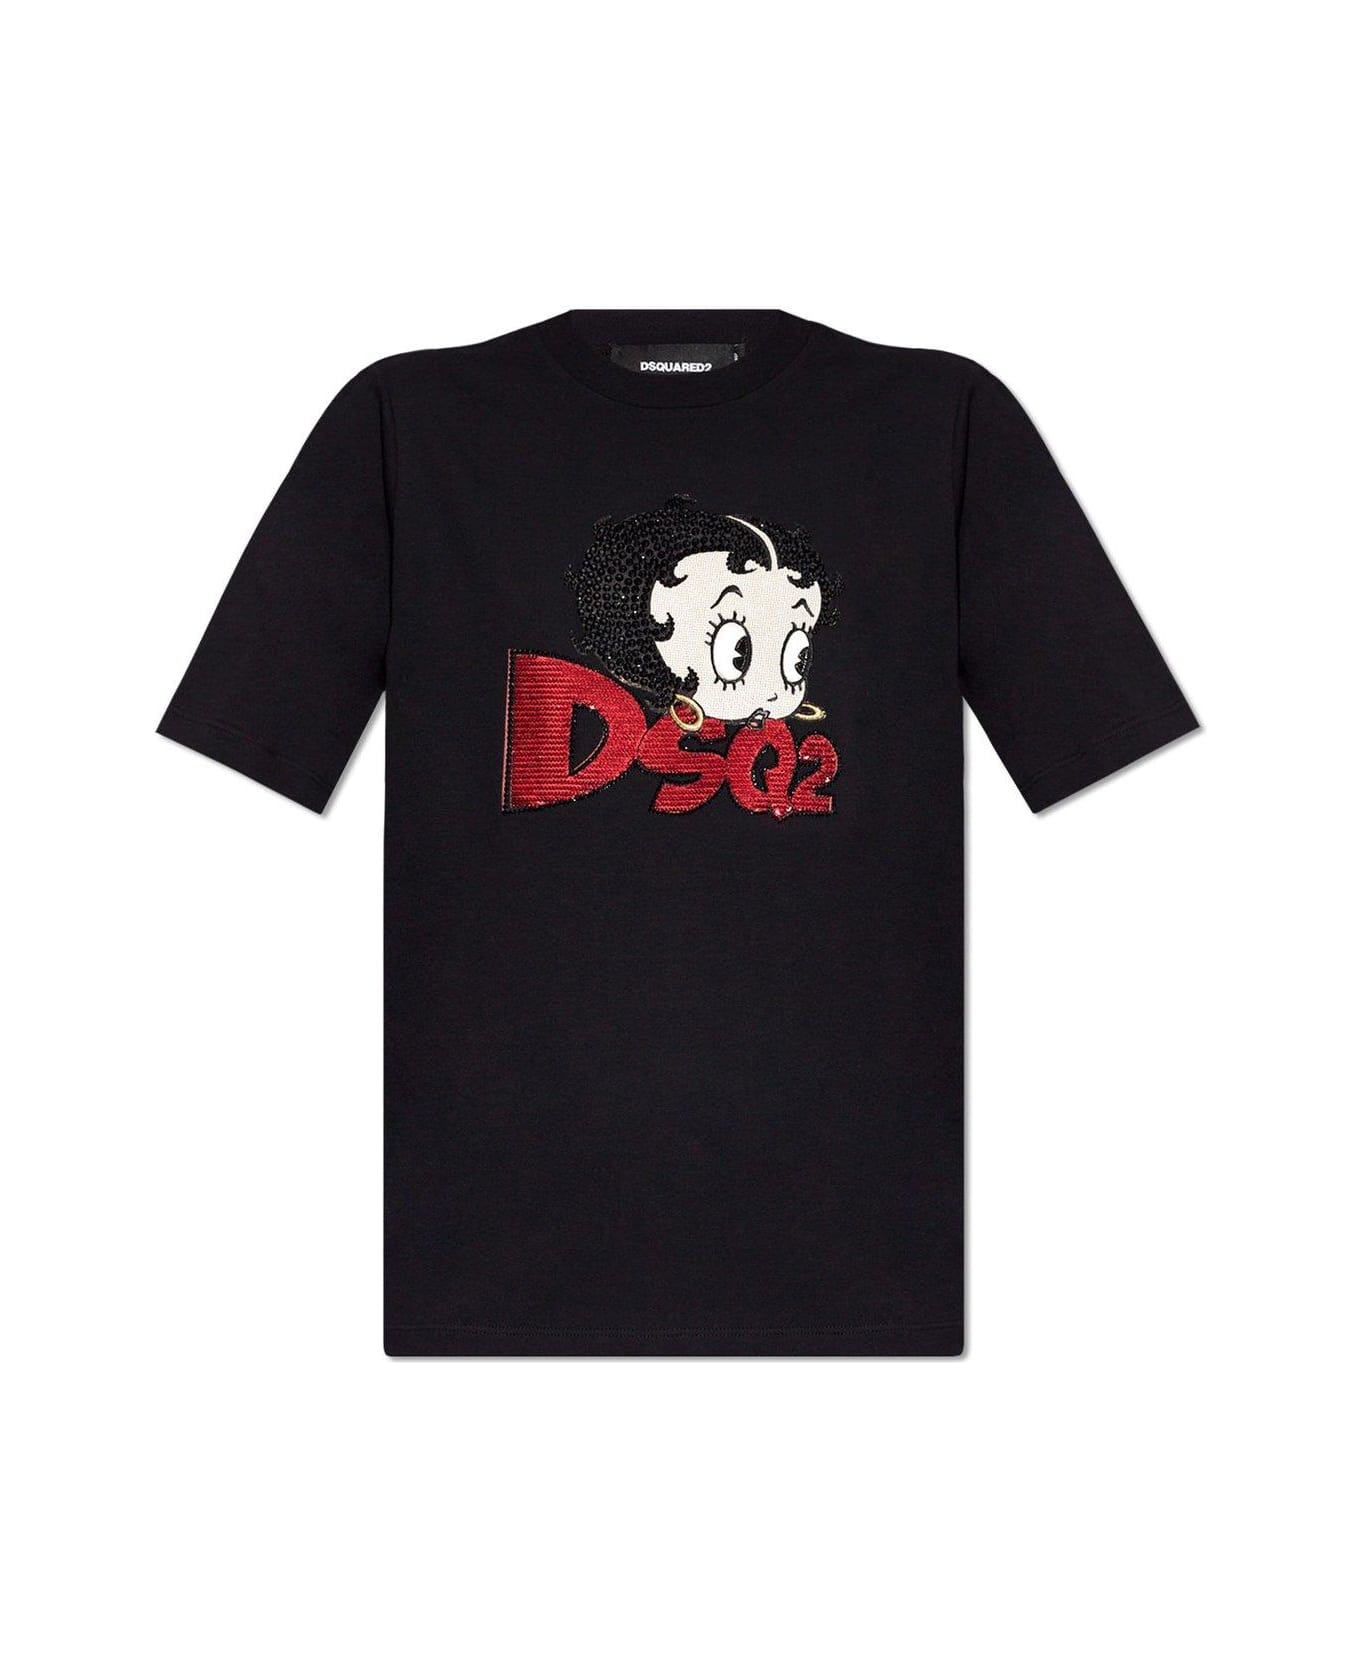 Dsquared2 Betty Boop Sequin Embellished T-shirt - Black